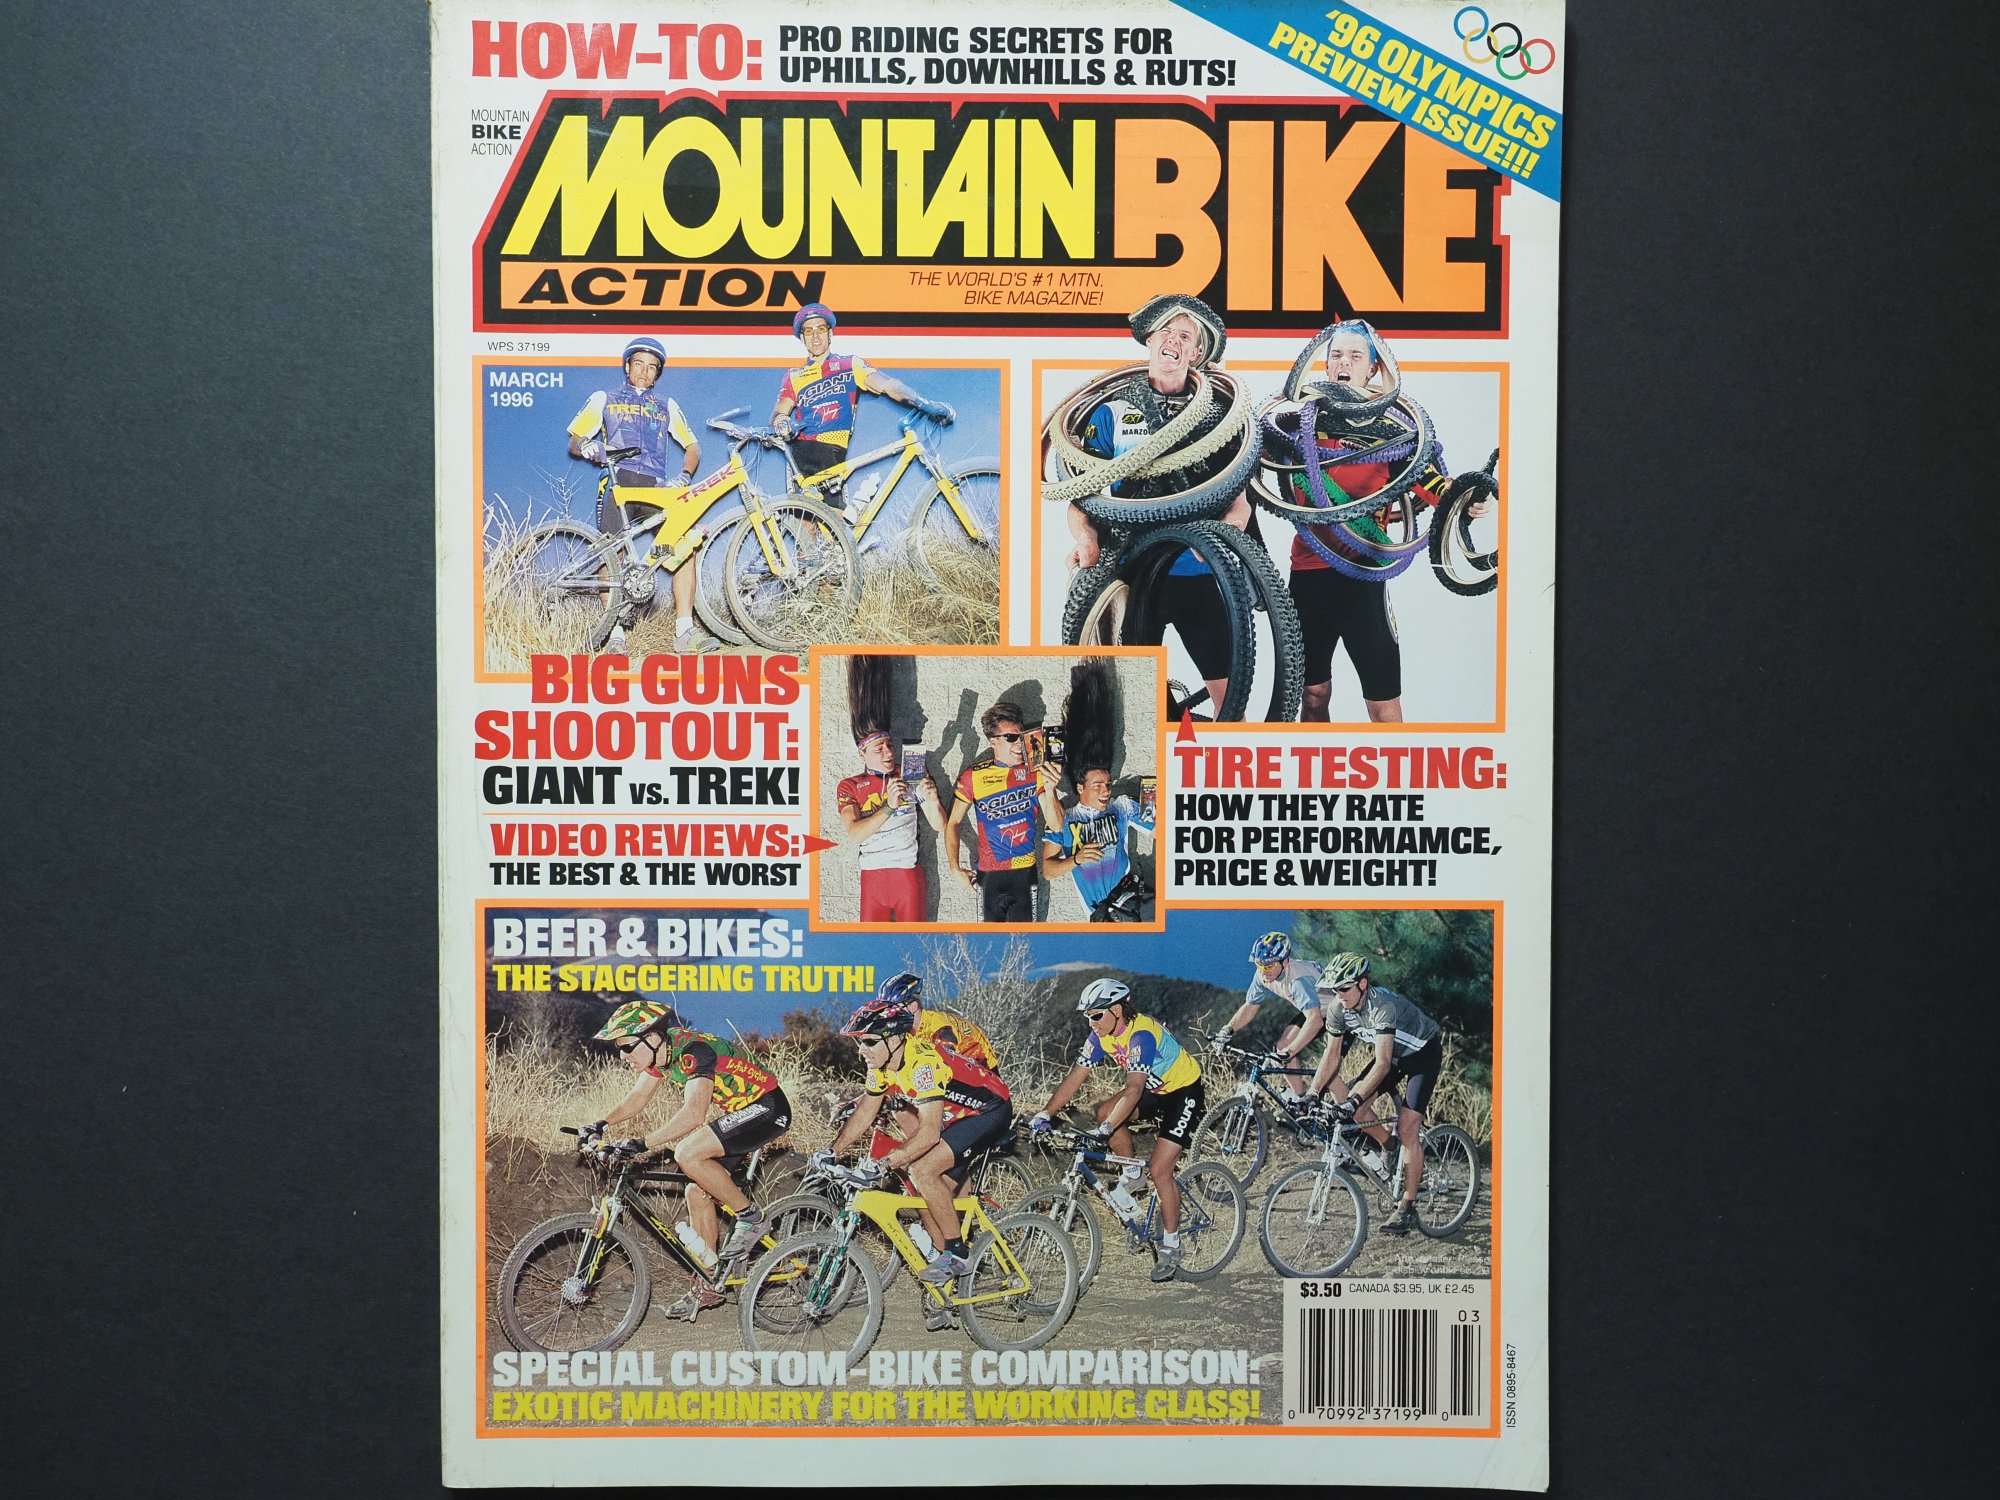 MOUNTAIN BIKE ACTION
1996(MARCH)